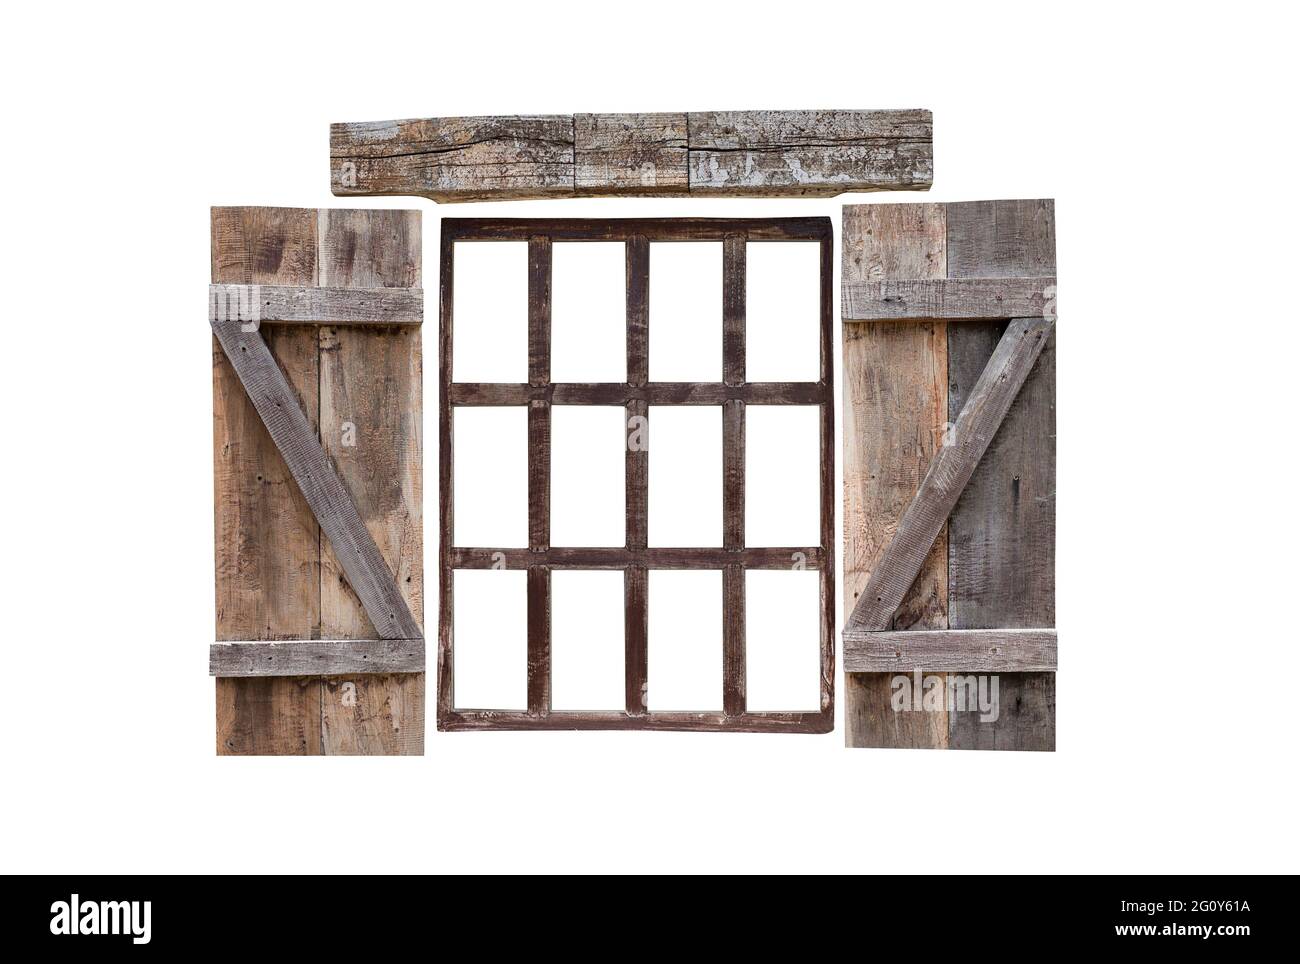 Isolated natural wooden window frame on white background, twelve panes, opened window, country style wooden window, old by weather condition. Stock Photo